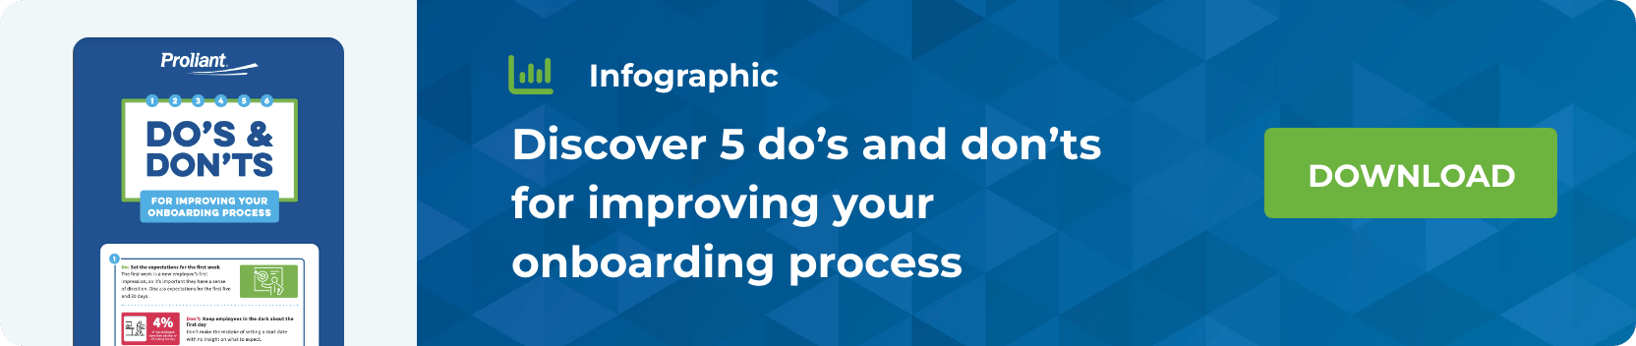 Infographic  Discover 5 dos and donts for improving your onboarding process